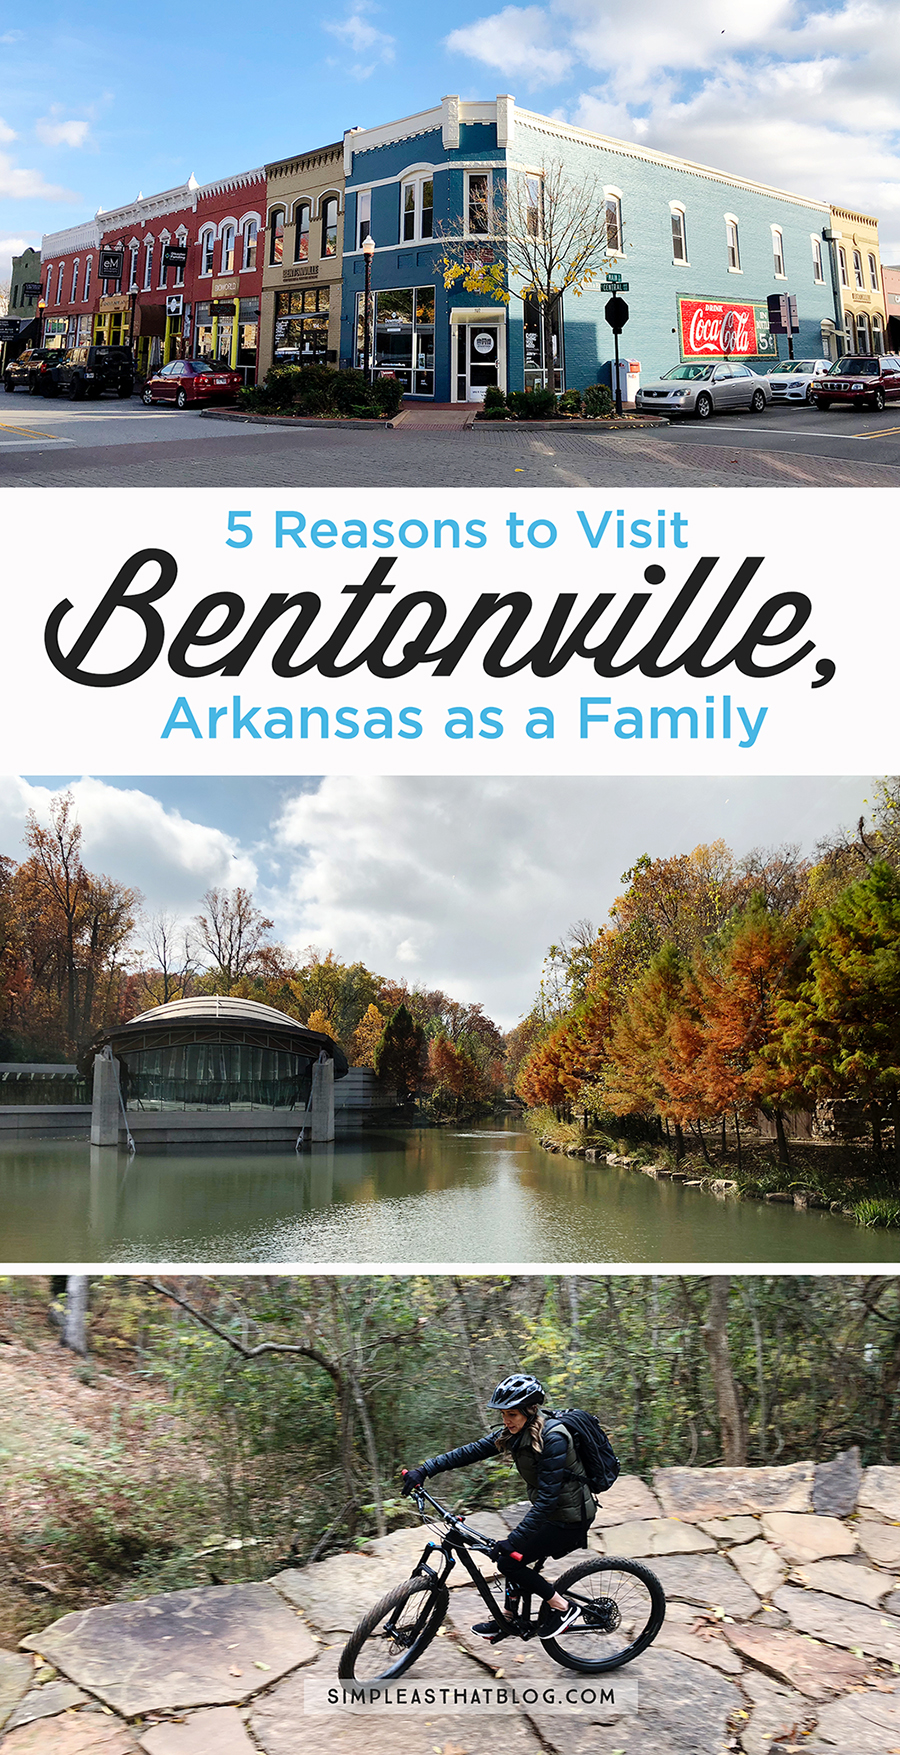 Good food, art, and outdoor adventure - you'll find it all in Bentonville, Arkansas. #TasteAndTravelBentonville #Ad @bentonvillecvb